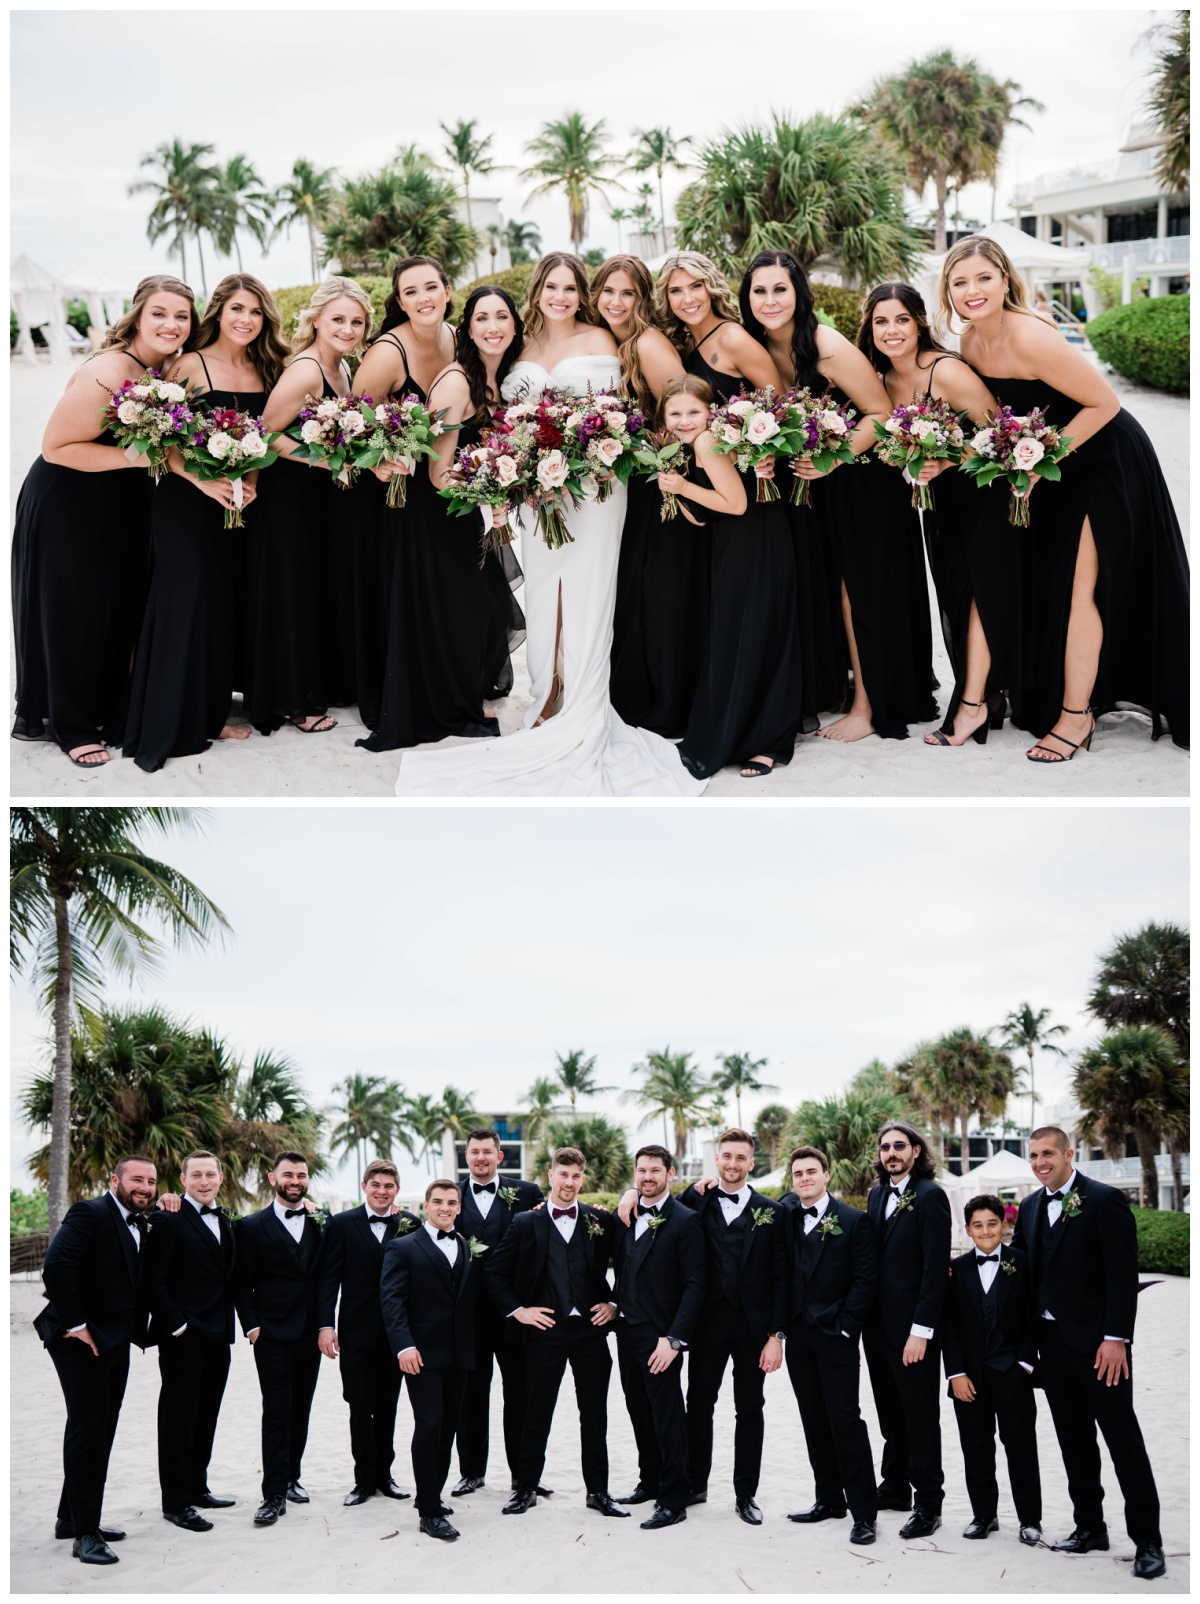 Bride stands with dark mauve toned florals and bridesmaids in black bridesmaids gowns, groomsmen in tuxedos on beach wedding day